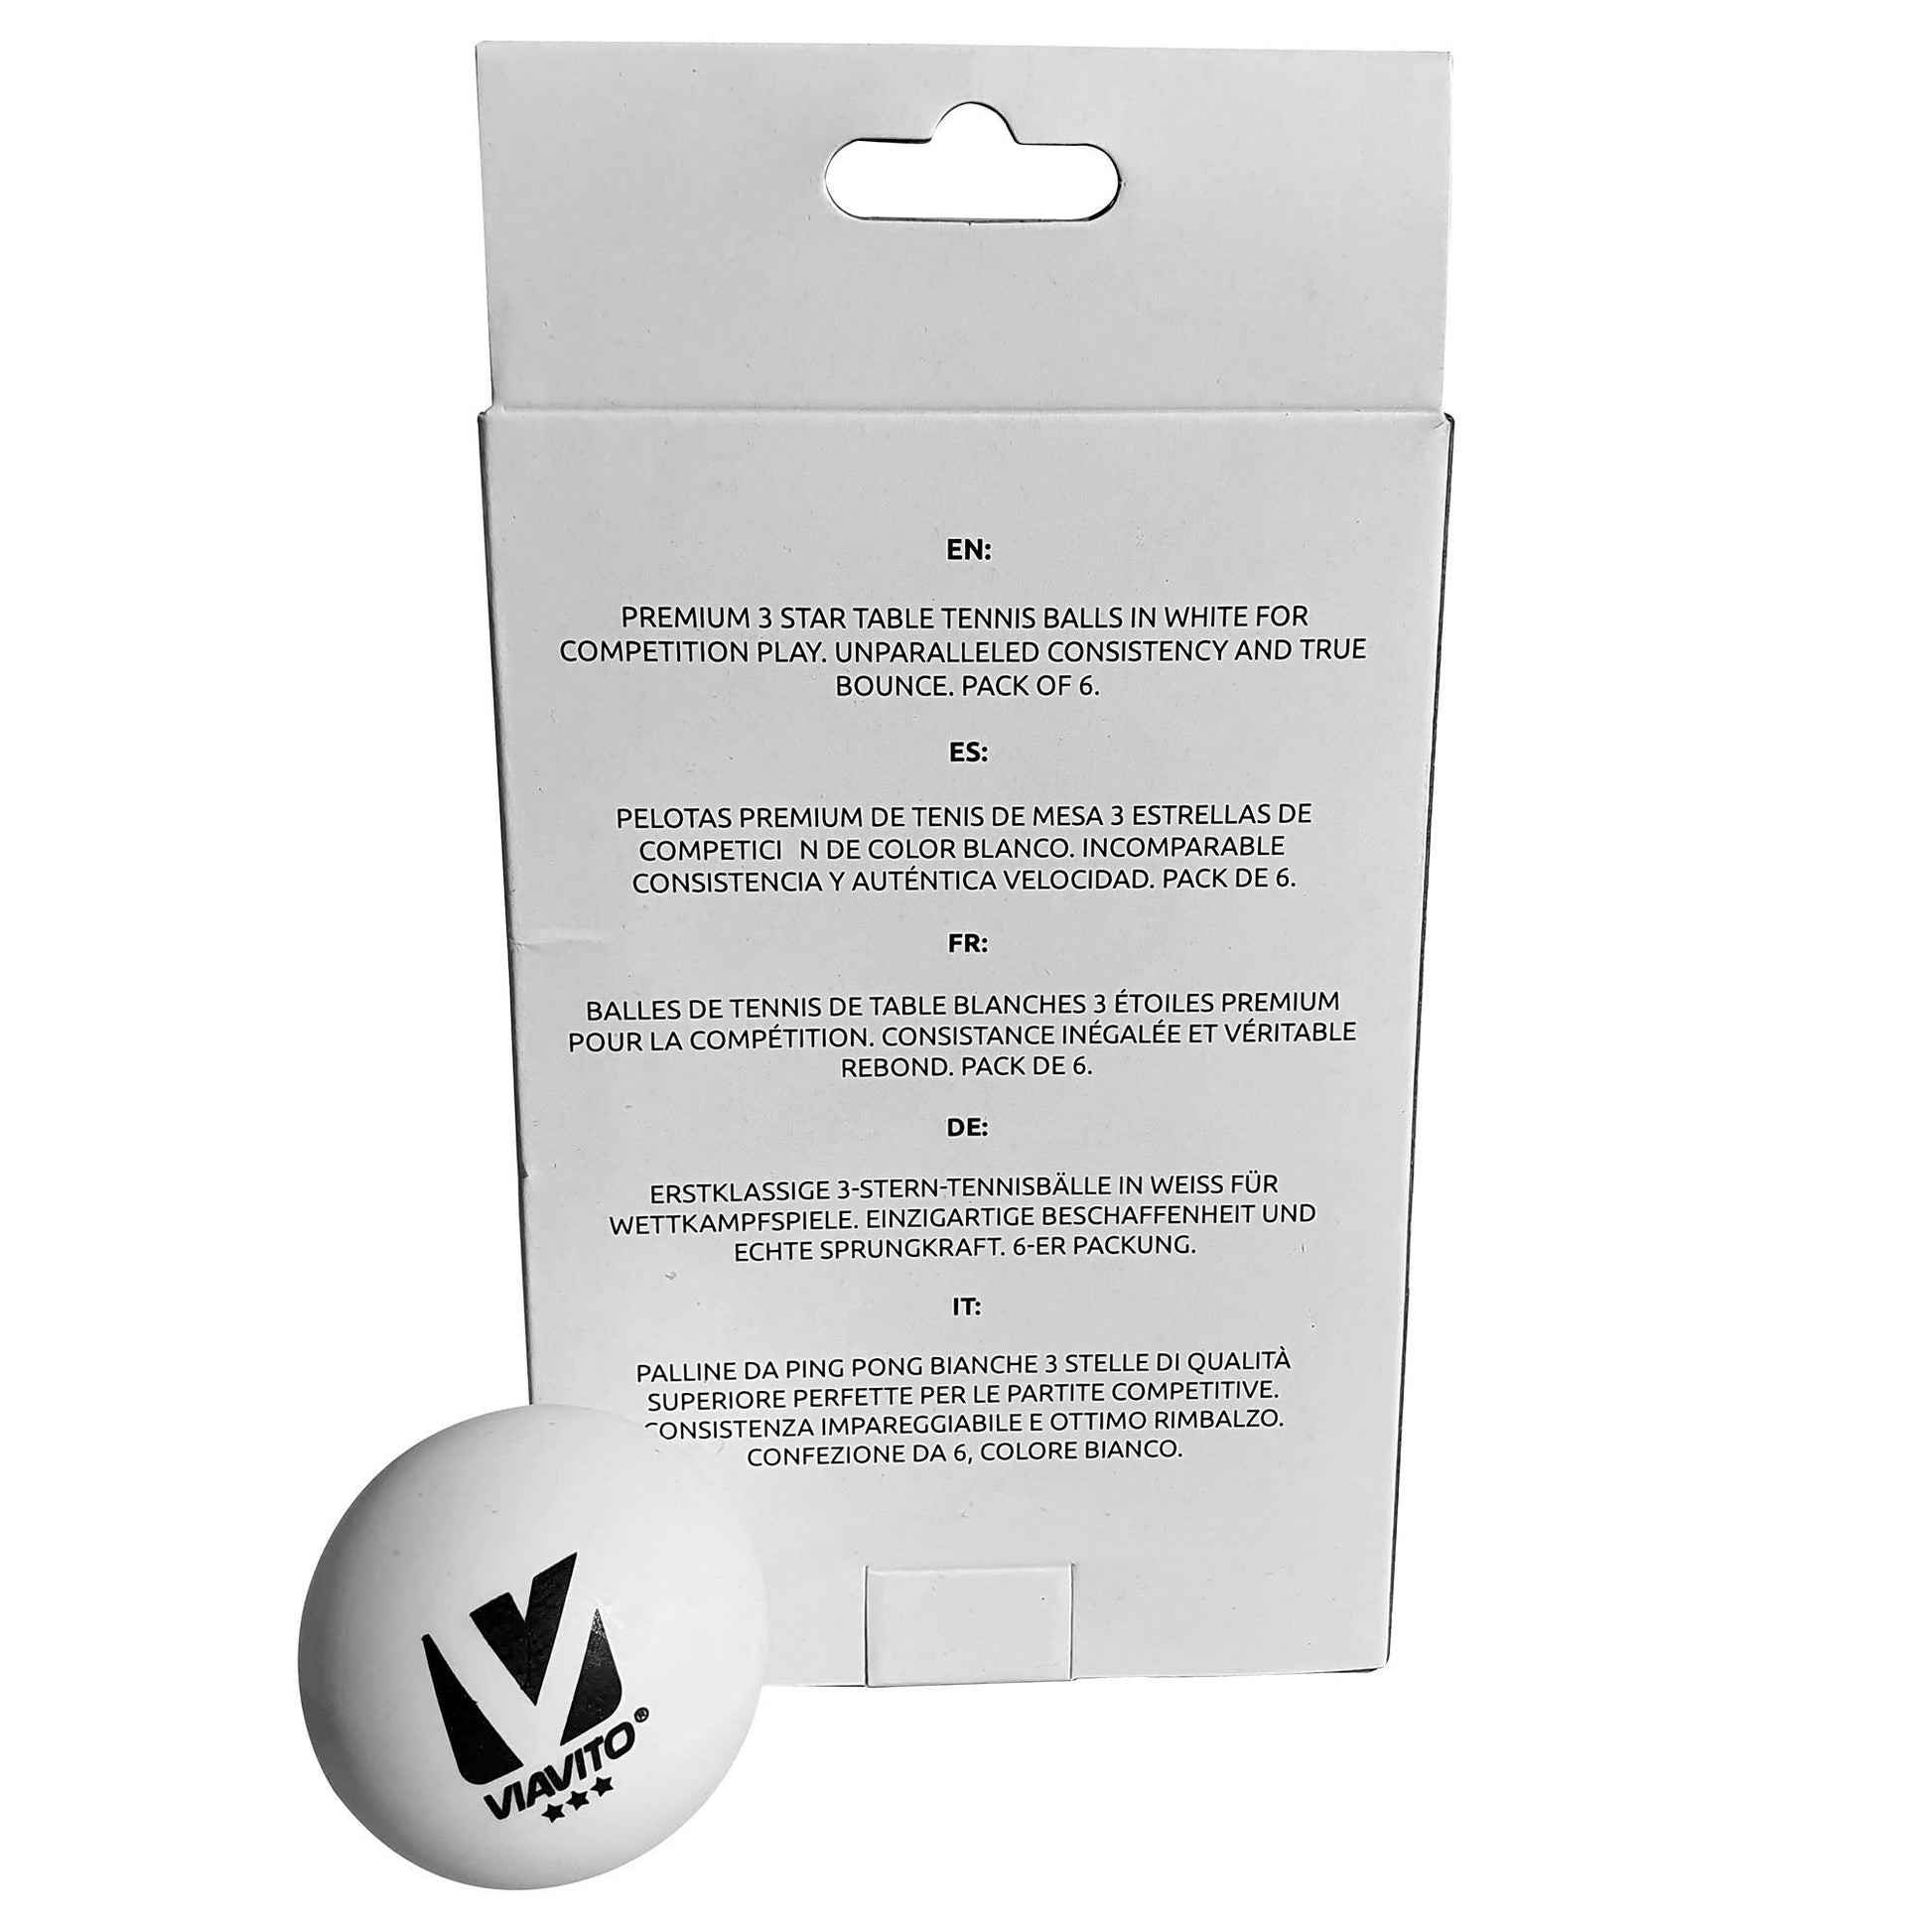 |Viavito Compete Pro 3 Star Table Tennis Balls - Pack of 6 - New - Back|